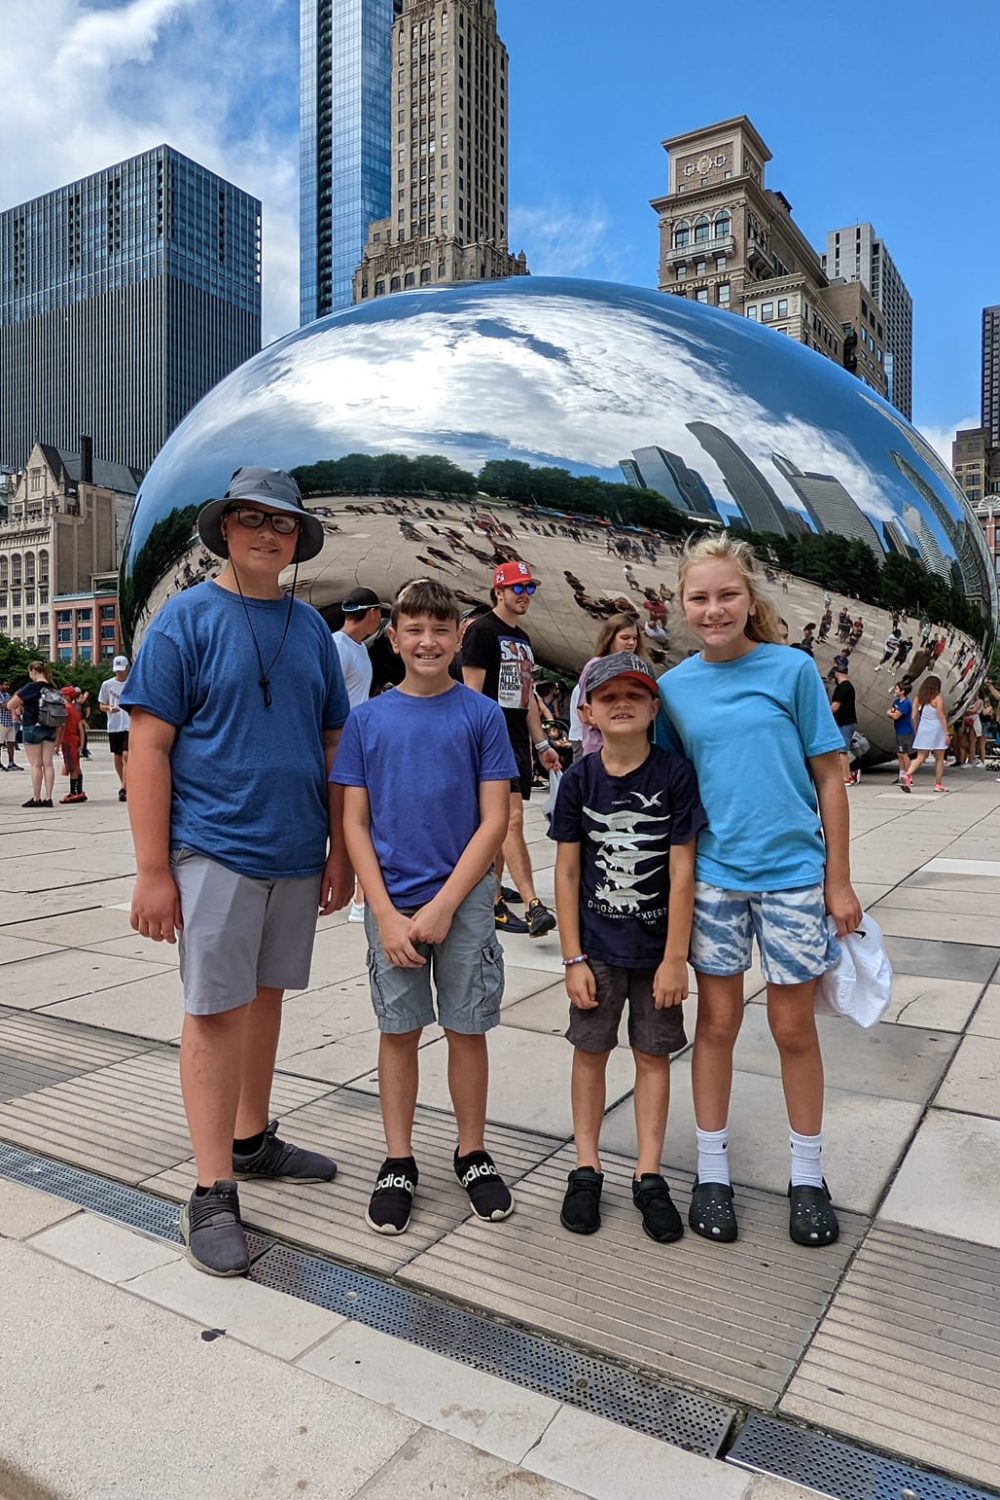 Cloud Gate, also known as the bean, located in Millennium Park in Chicago, IL